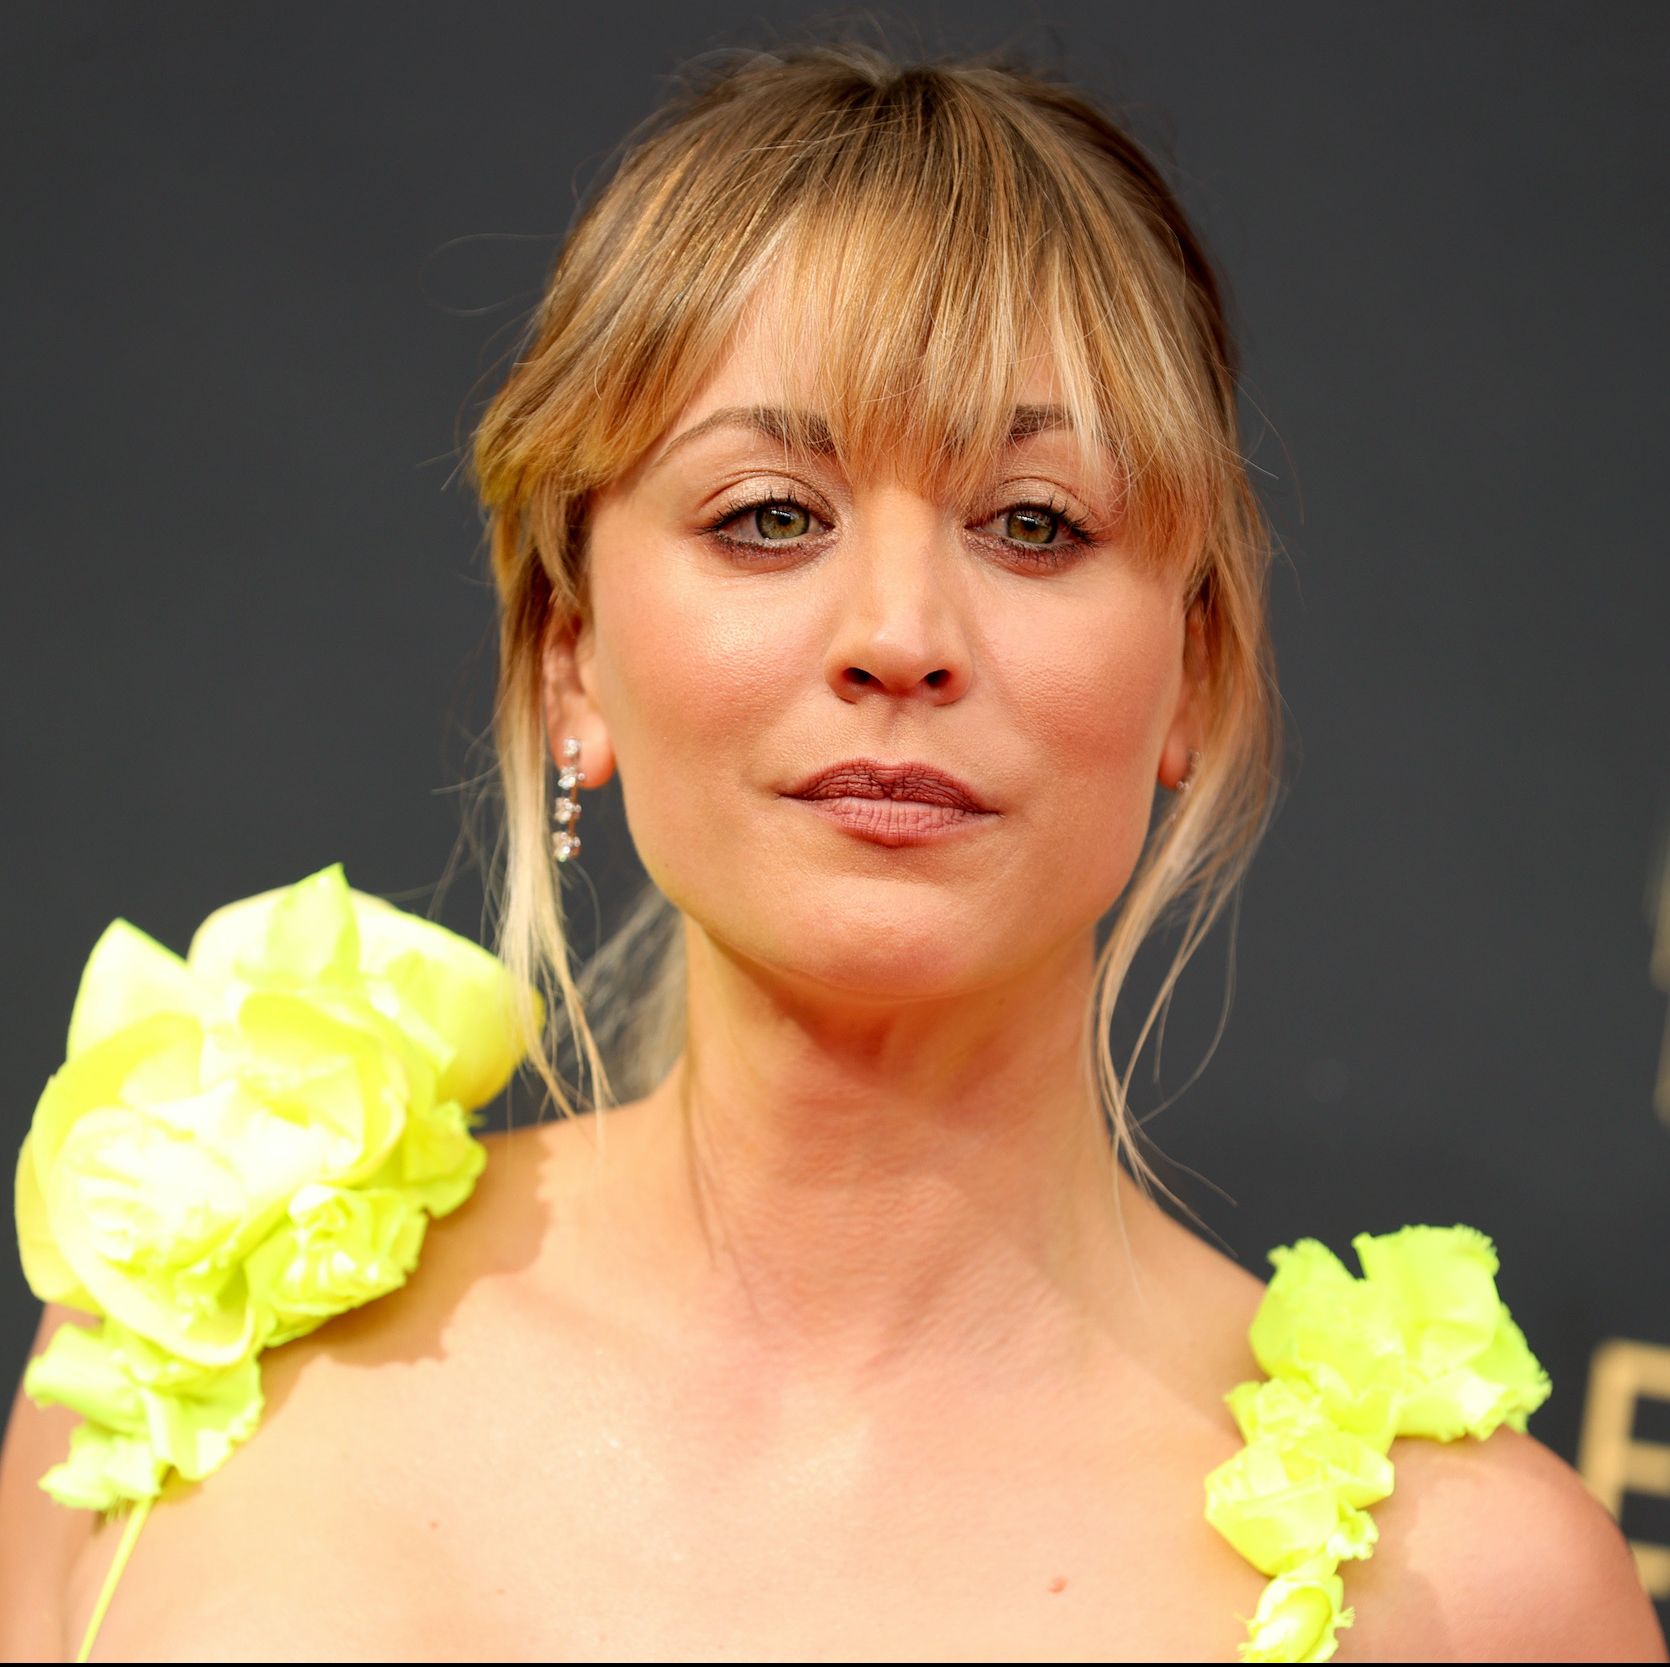 Kaley Cuoco Shares a Throwback Instagram That 'Big Bang Theory' Fans Will Adore